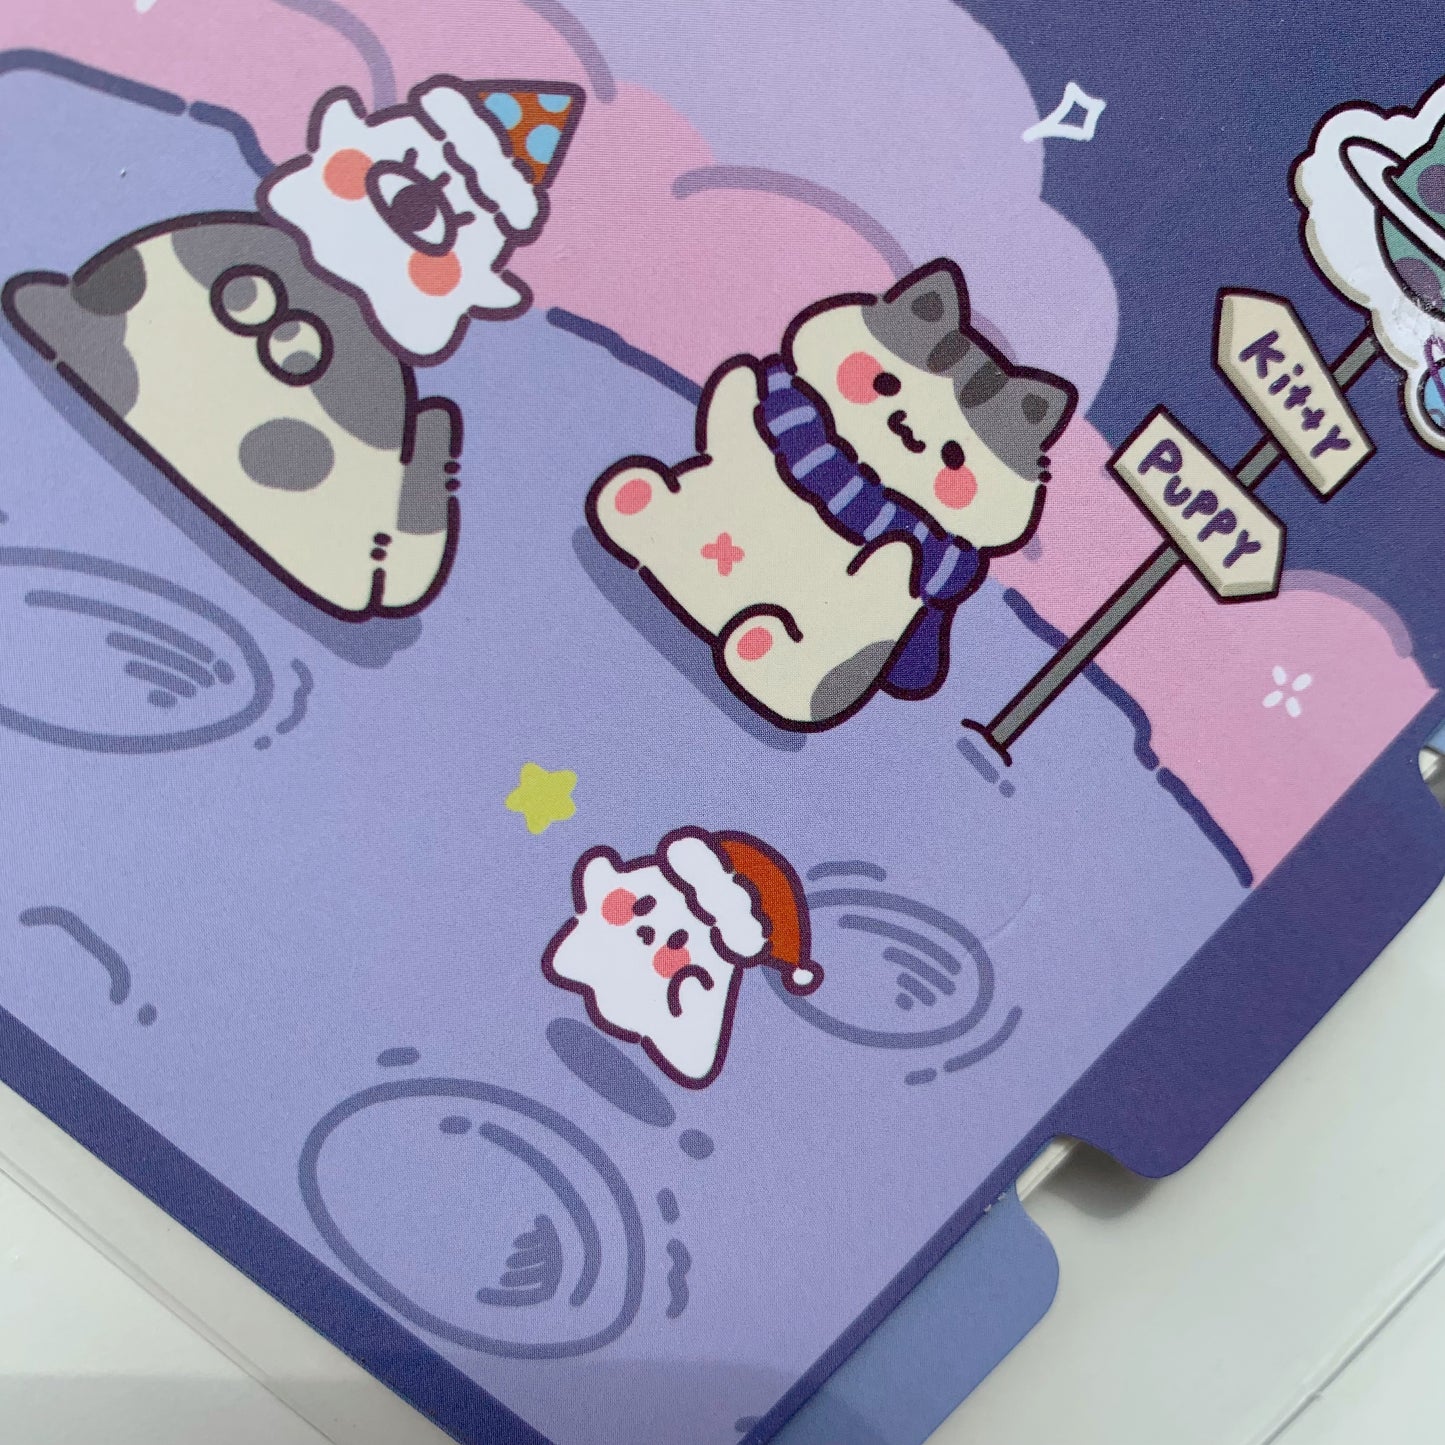 Space Meow Journal